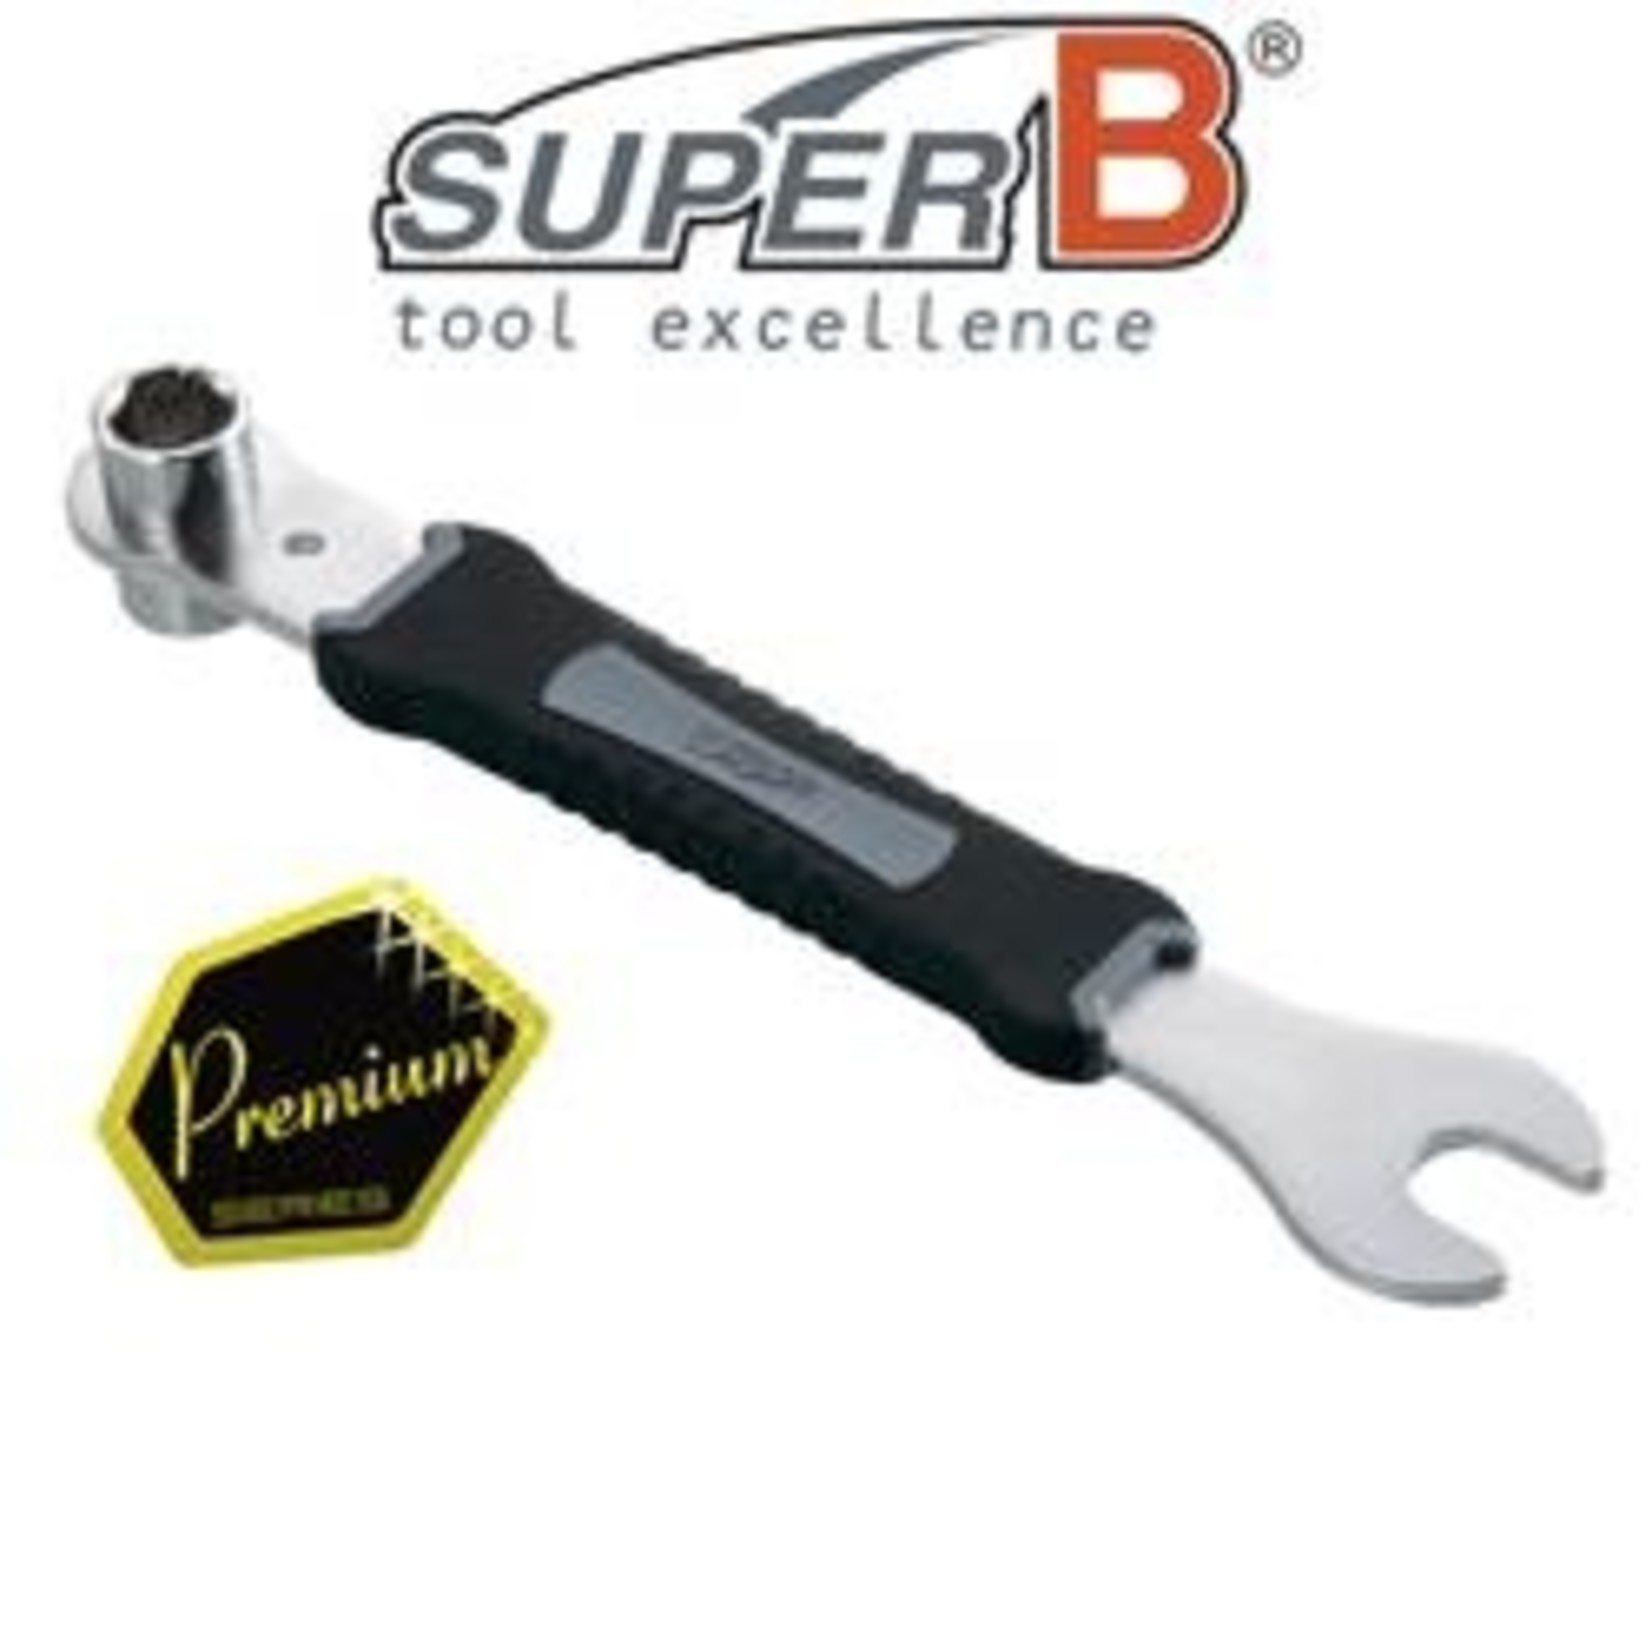 Super B SuperB Multi-Function Pedal Wrench - Moulded Handle For Comfort And Control